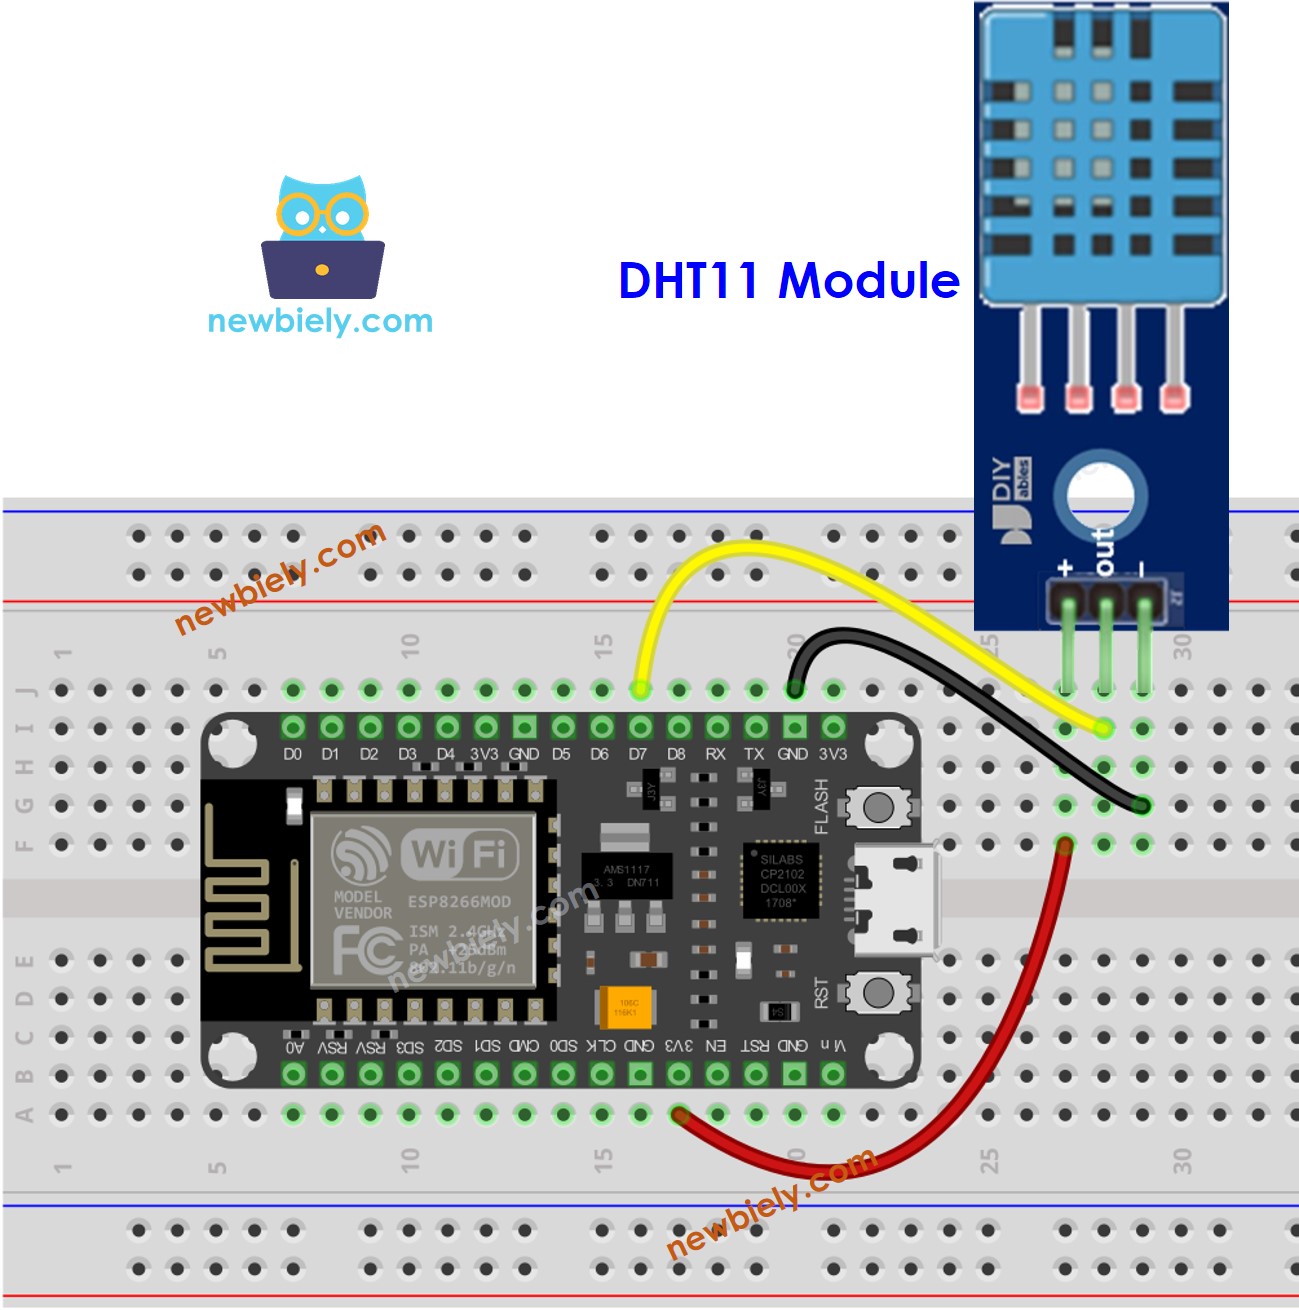 The wiring diagram between ESP8266 NodeMCU and DHT11 Temperature and humidity Module